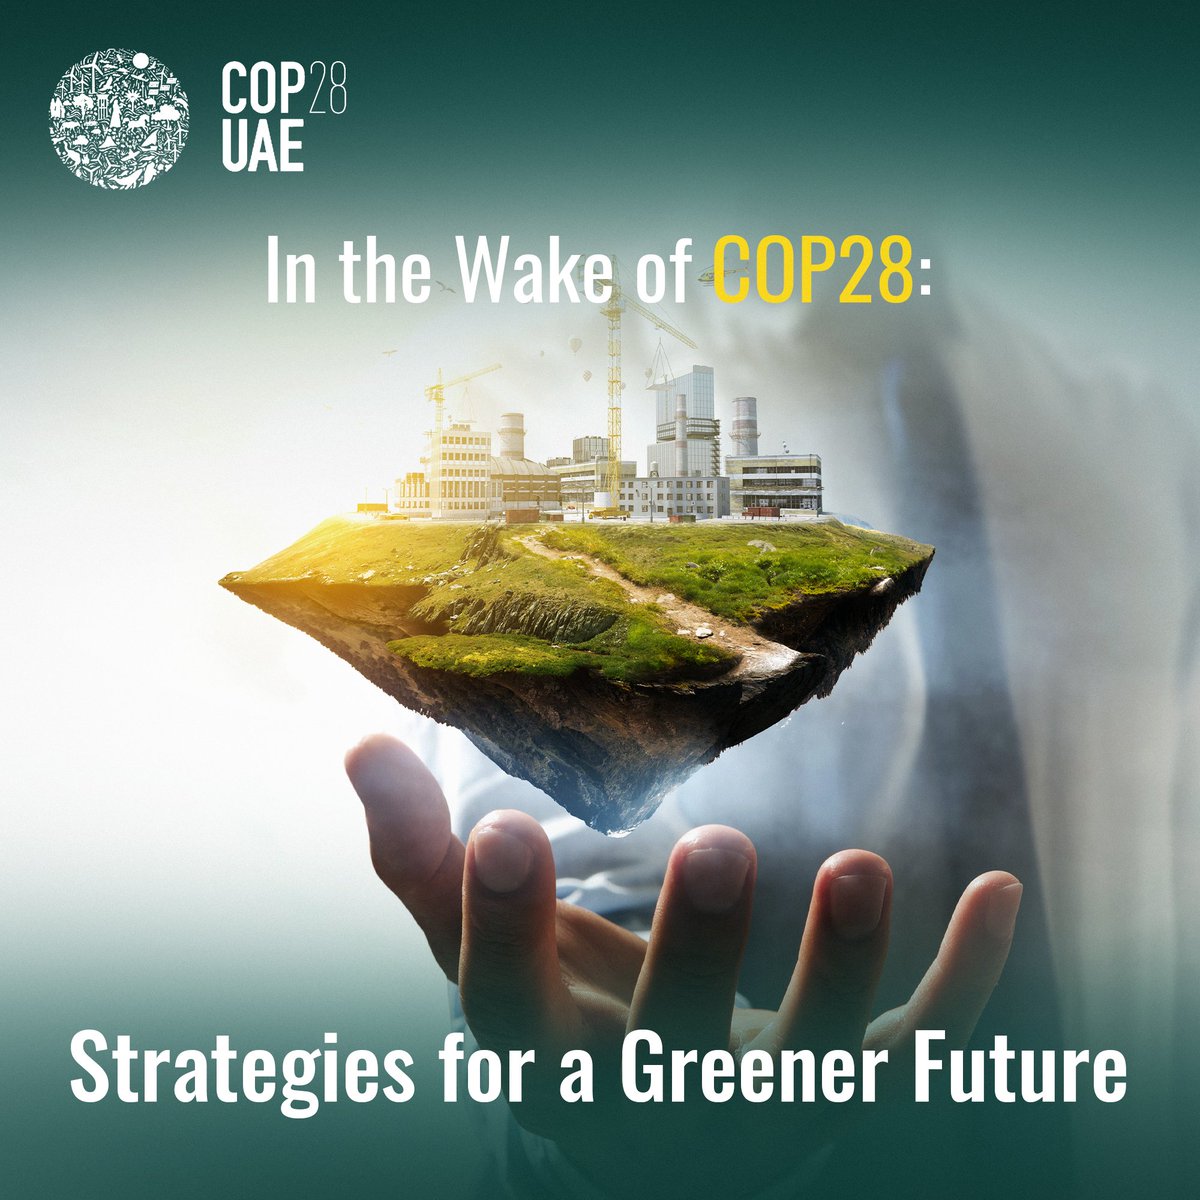 Post-COP28, Arab Basalt Fiber Company empowers greener construction with BFRP, curbing emissions by 74% compared to conventional steel.

It's a strategy for a future where green is the standard!

#COP28 #ClimateAction #ParisAgreement #ForThePlanet #SustainabilityNow